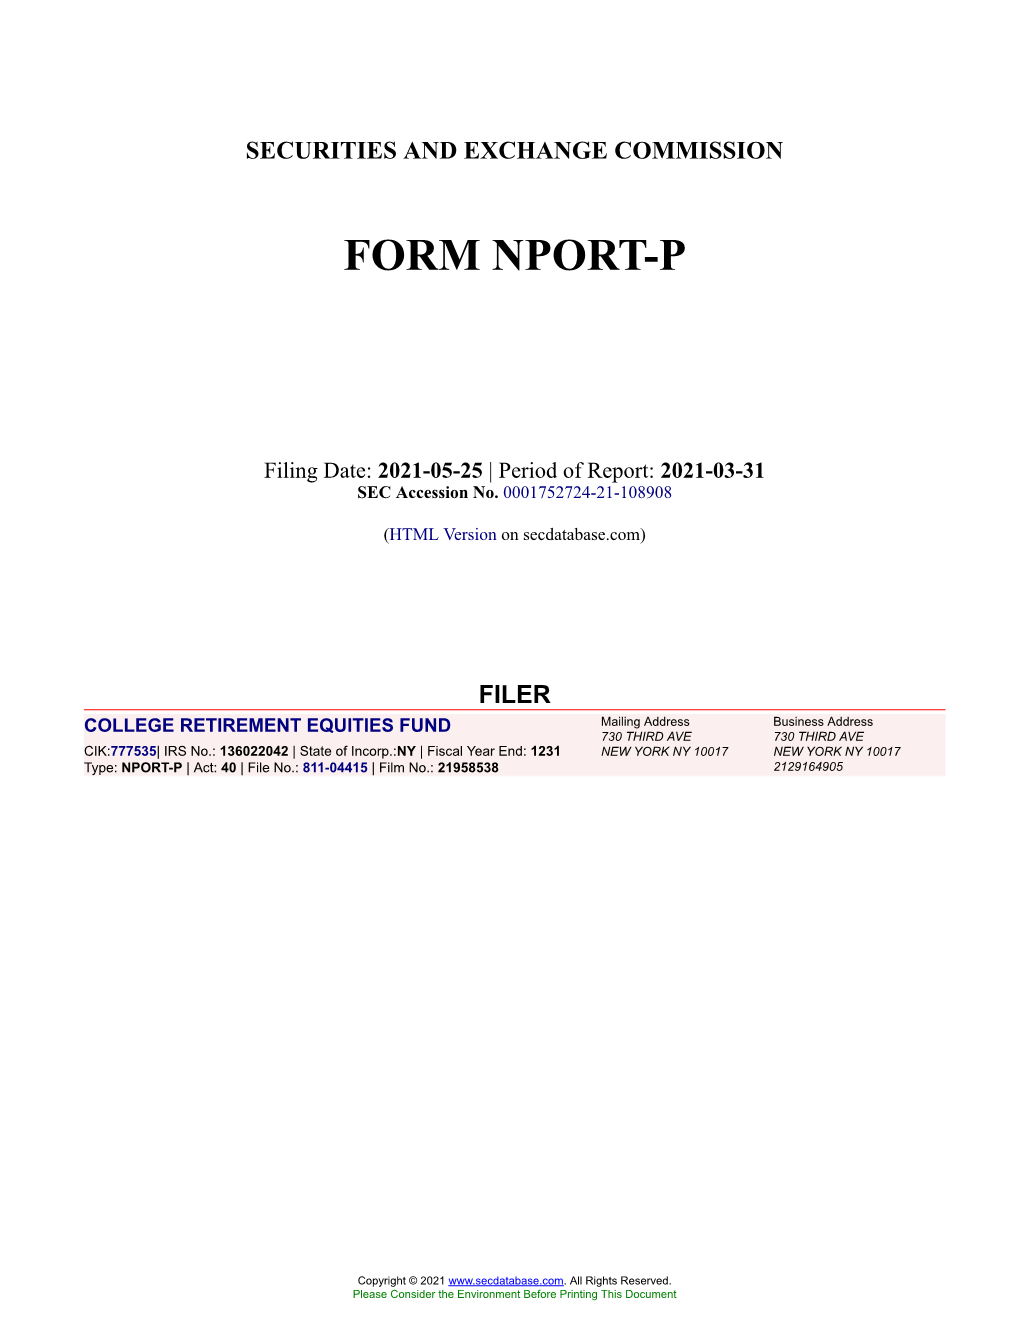 COLLEGE RETIREMENT EQUITIES FUND Form NPORT-P Filed 2021